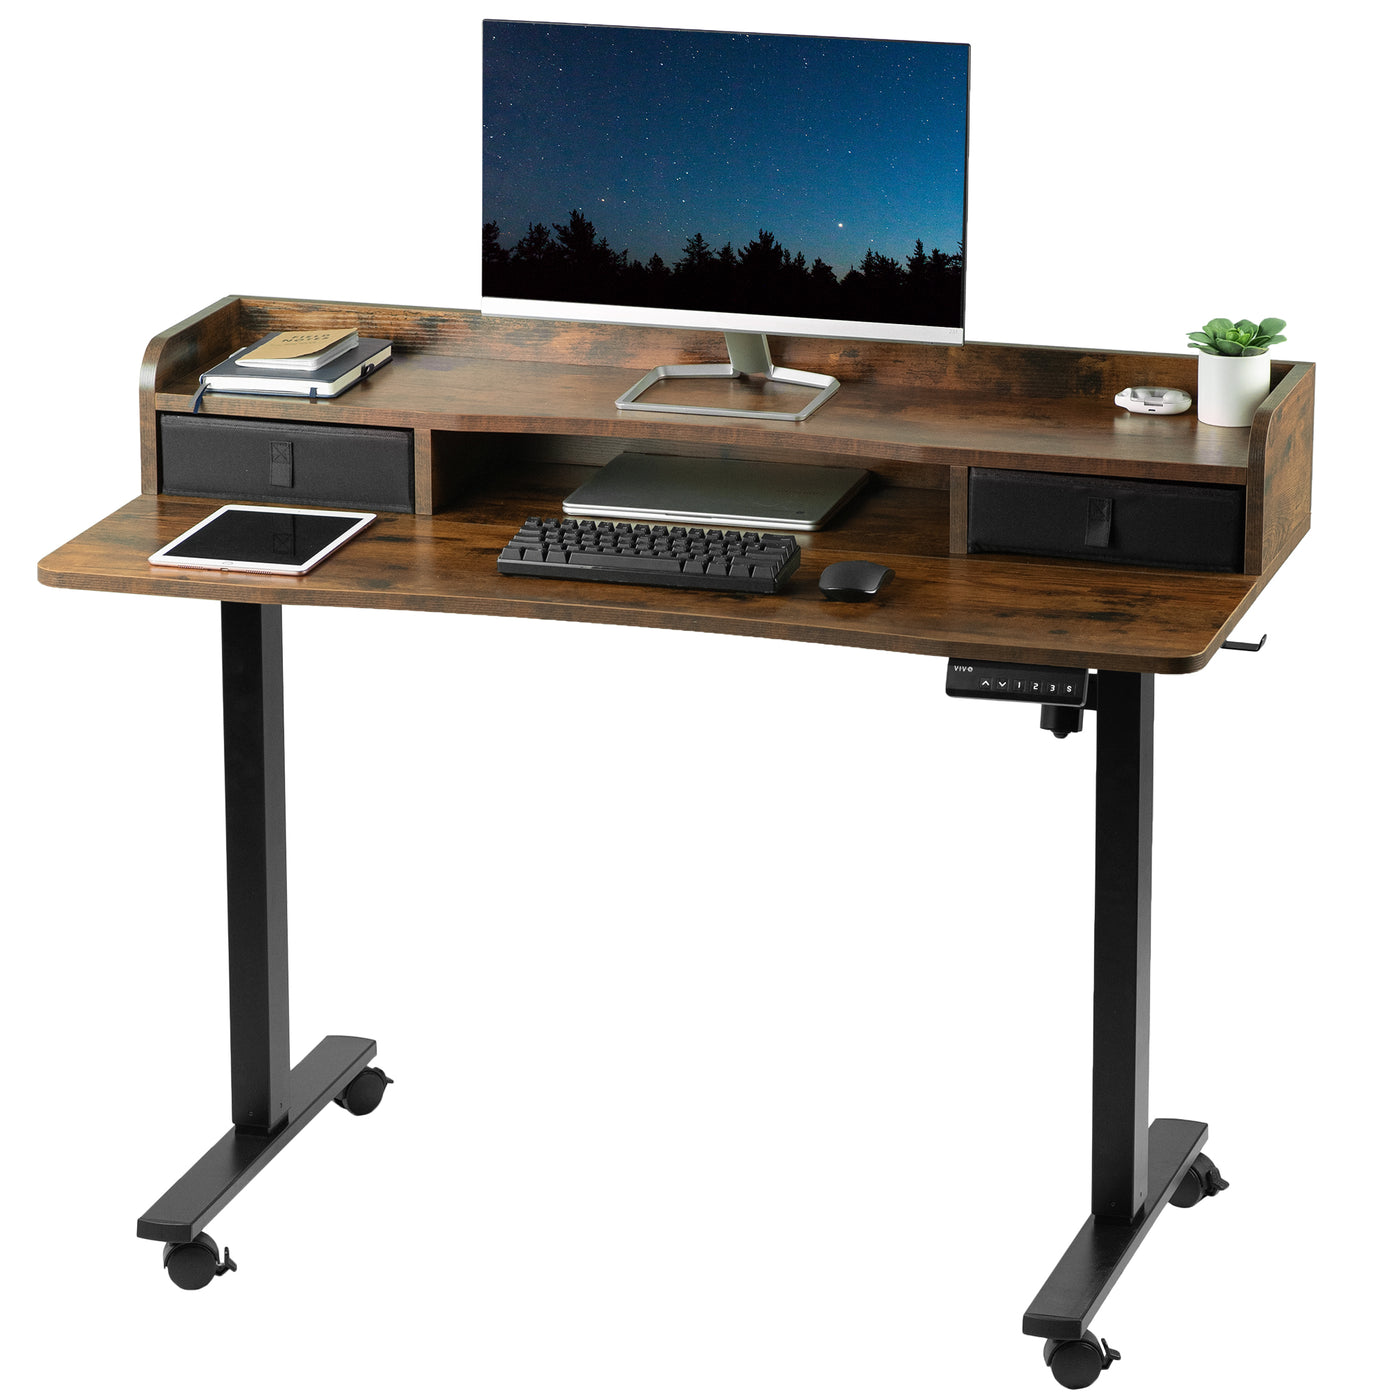 Rustic dual tier height adjustable mobile electric desk with storage drawers.